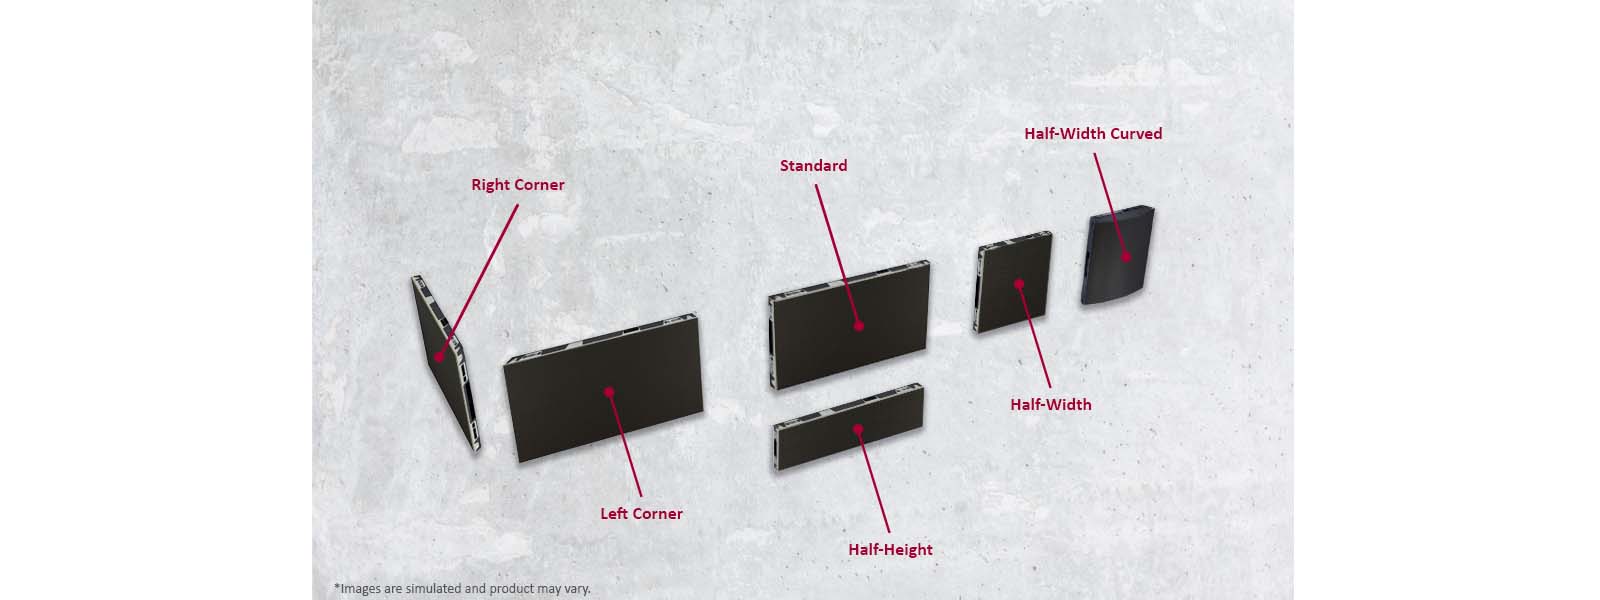 The LG LSCB Series Allows Seamless Imagery with a Variety of Panel Types